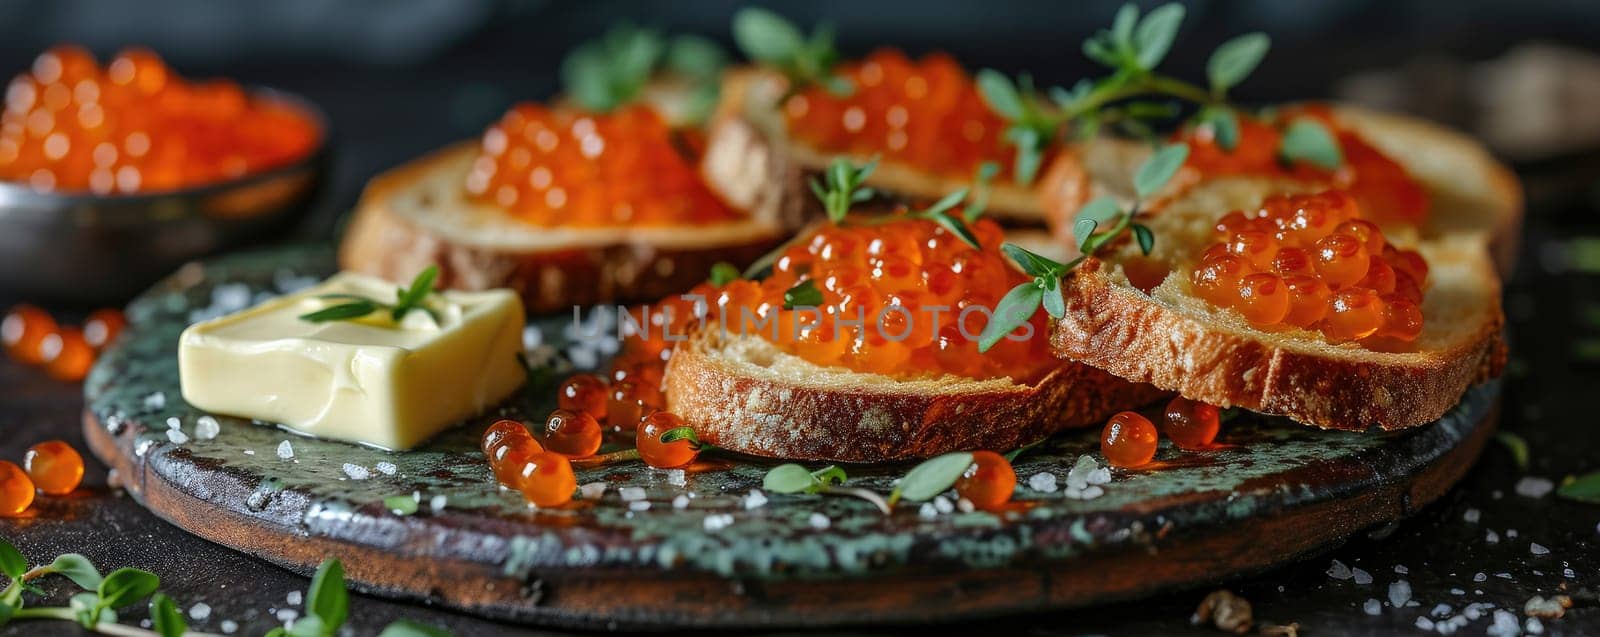 Sandwich with red caviar on a wooden table: a treat for connoisseurs of taste by Yurich32